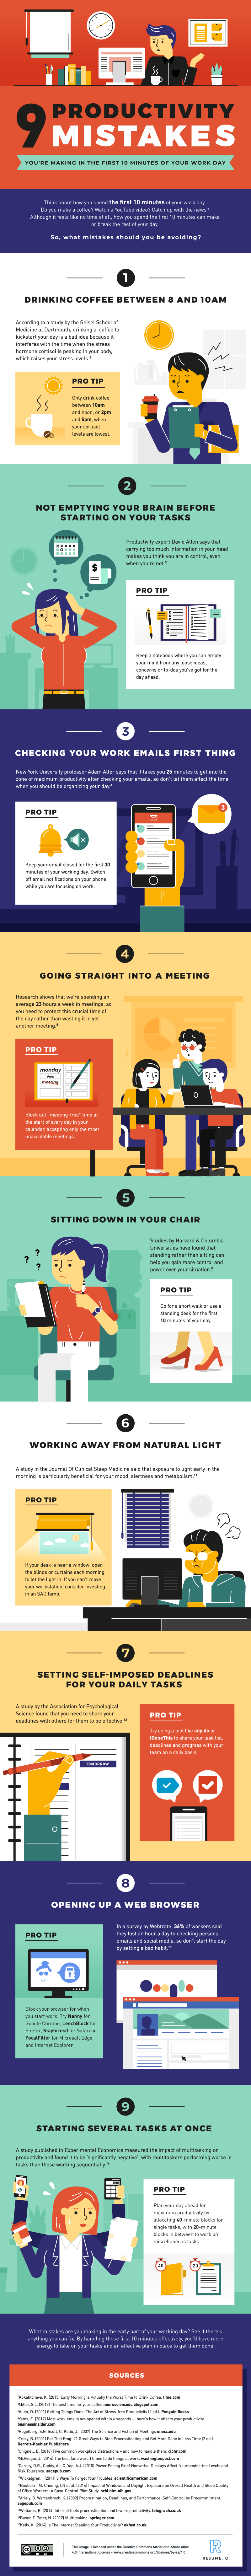 Maximize the First 10 Minutes of Your Work Day: Avoid 9 Productivity Mistakes - Infographic